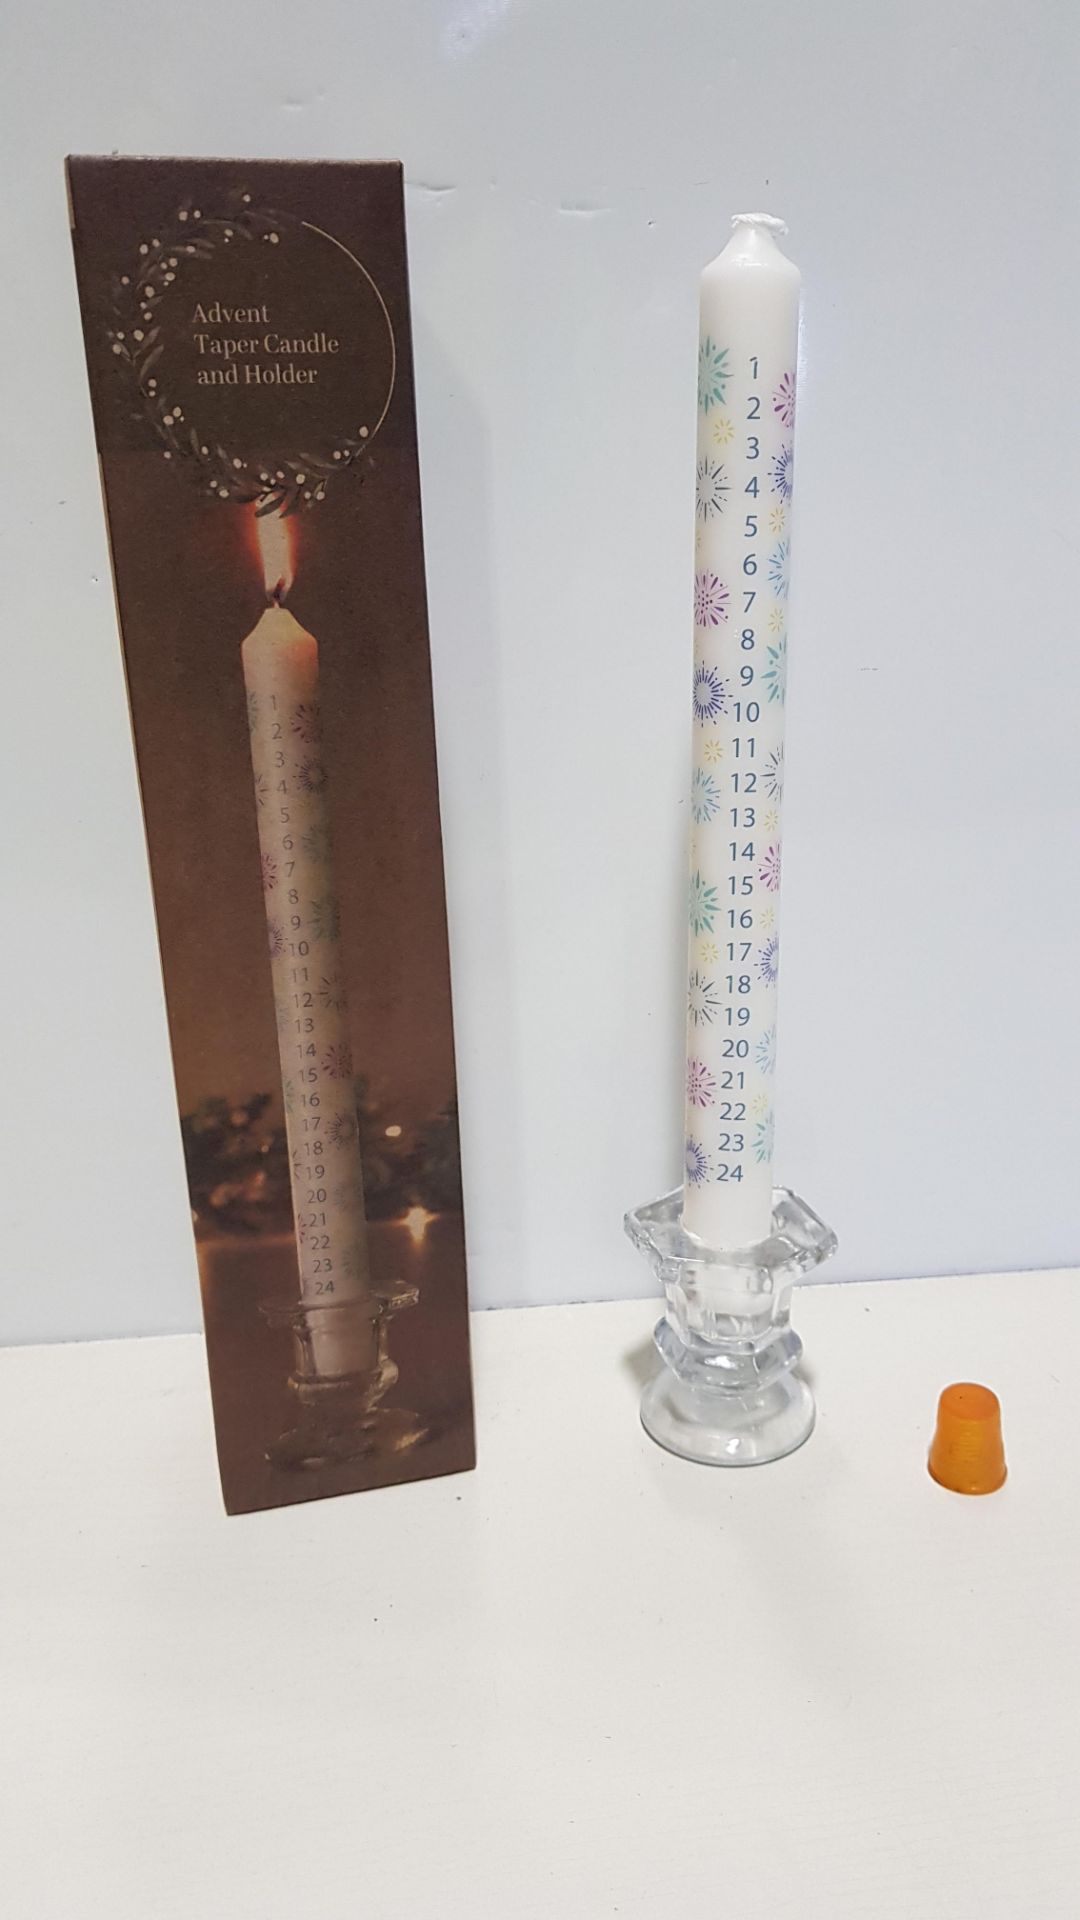 60 X BRAND NEW LAKELAND ADVENT TAPER CANDLE AND HOLDER - SIZE APPROX 5.5CM X 29 CM H - IN 1 BOX